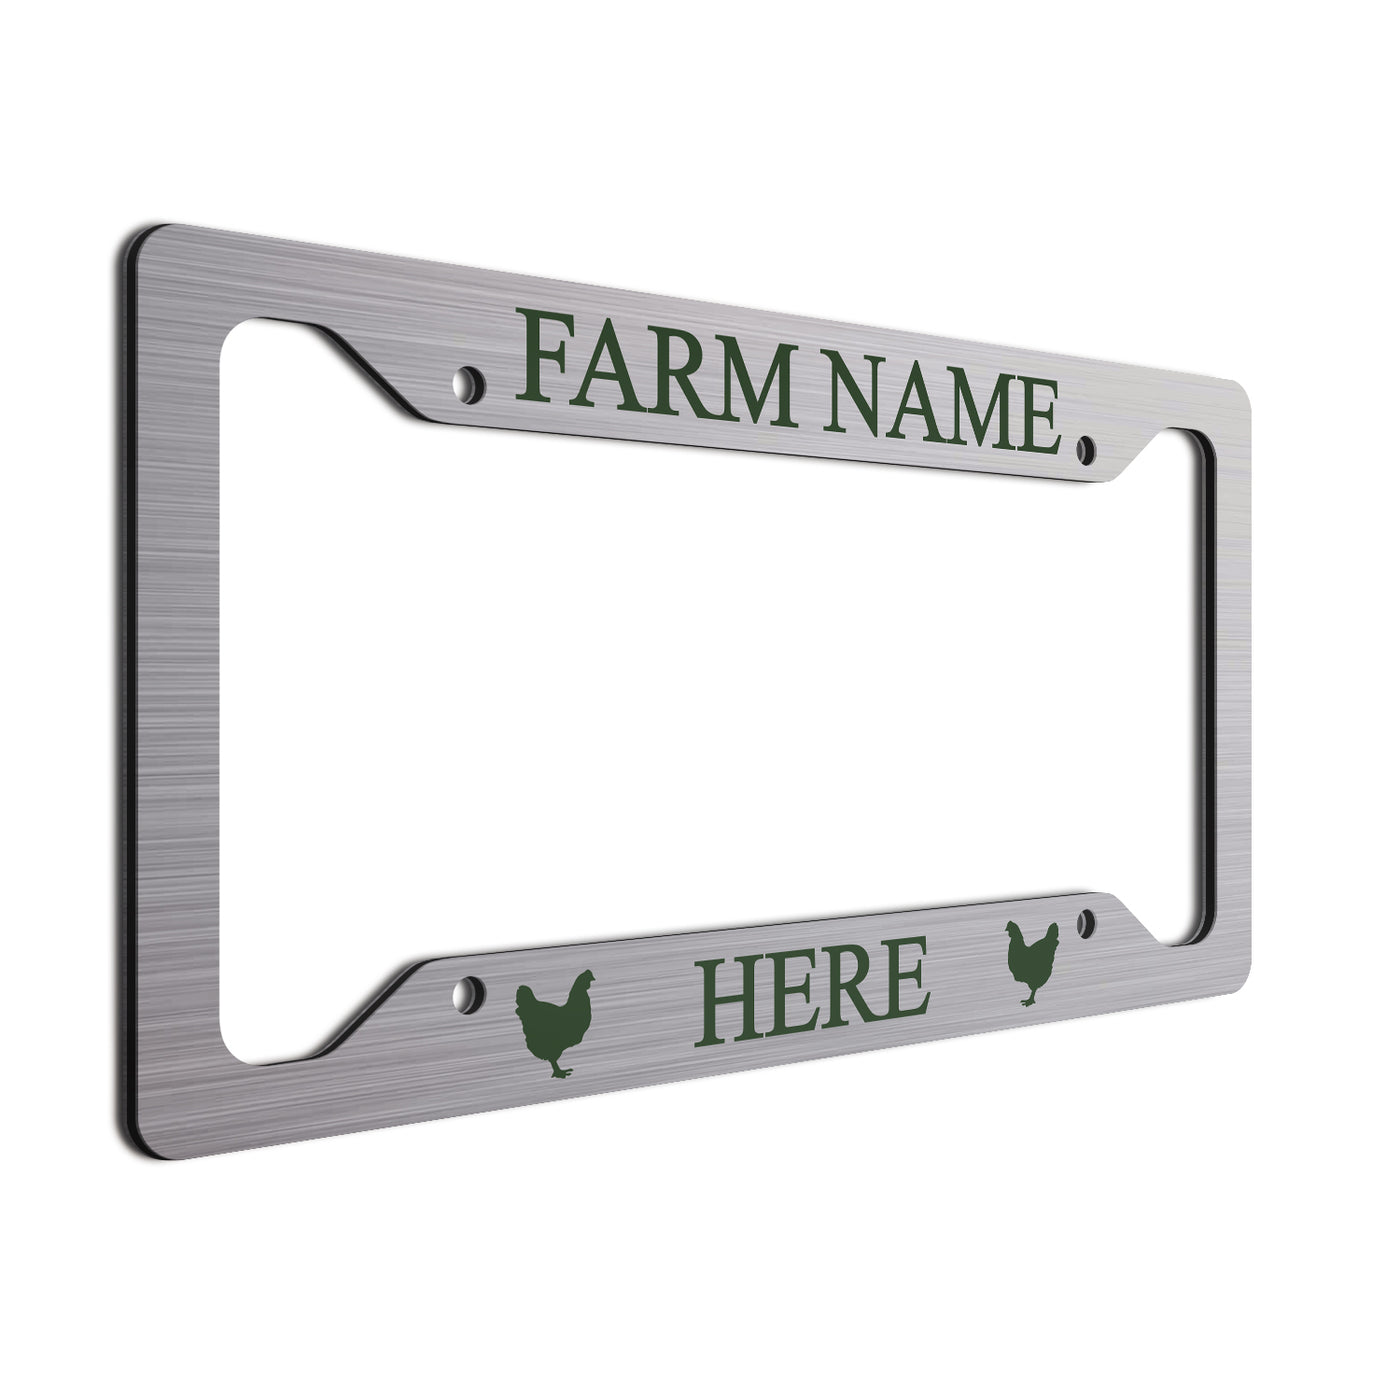 Dark Green Chickens and font on brushed finish